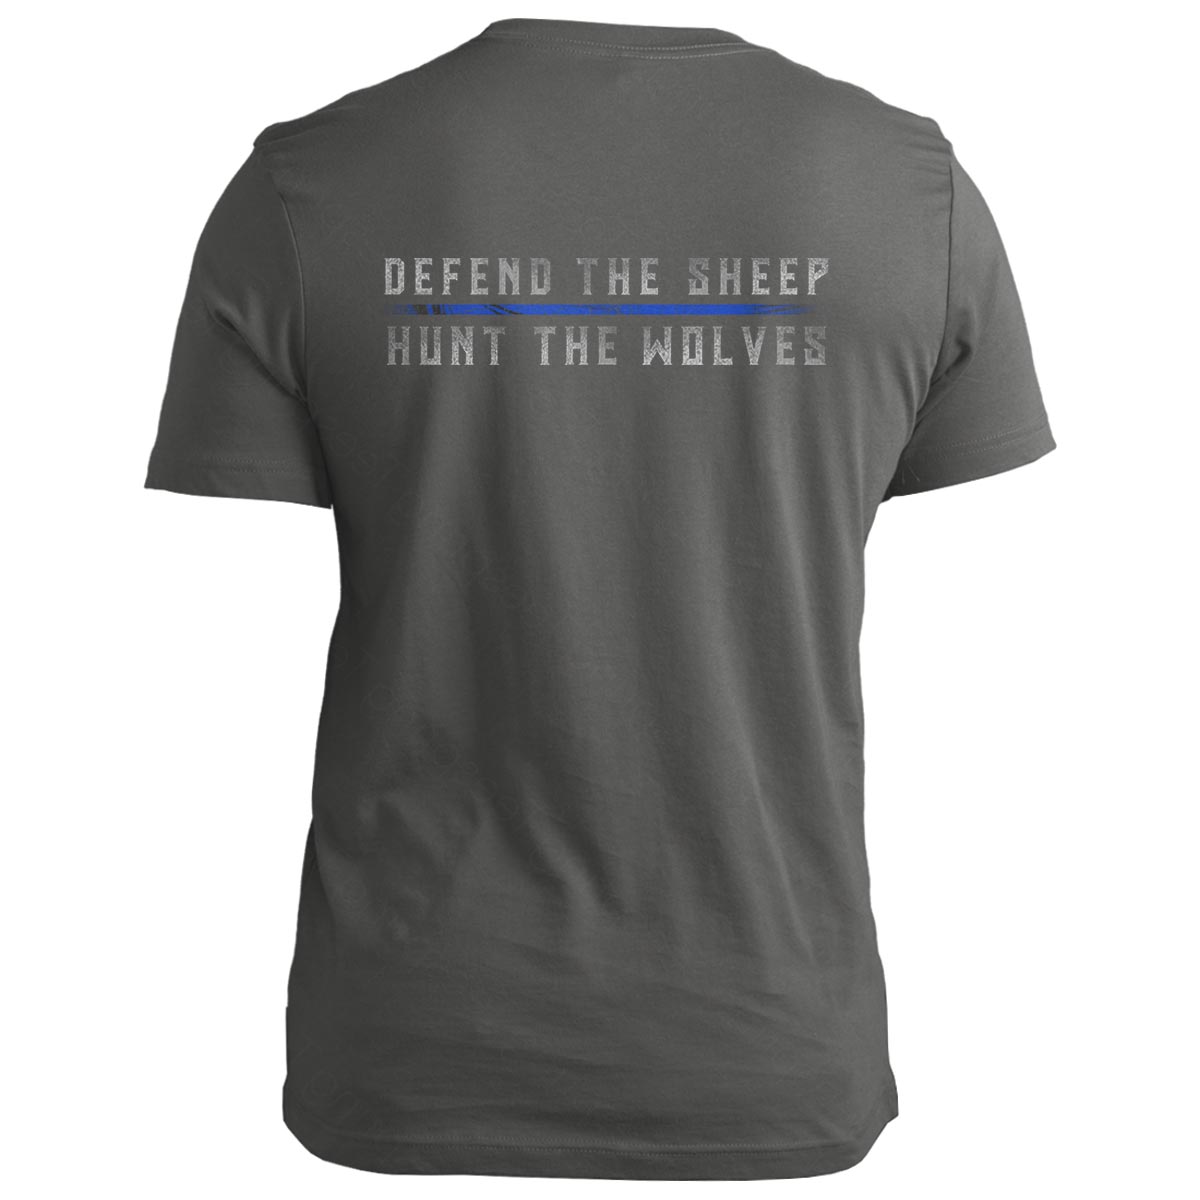 Defend the Sheep. Hunt the Wolves